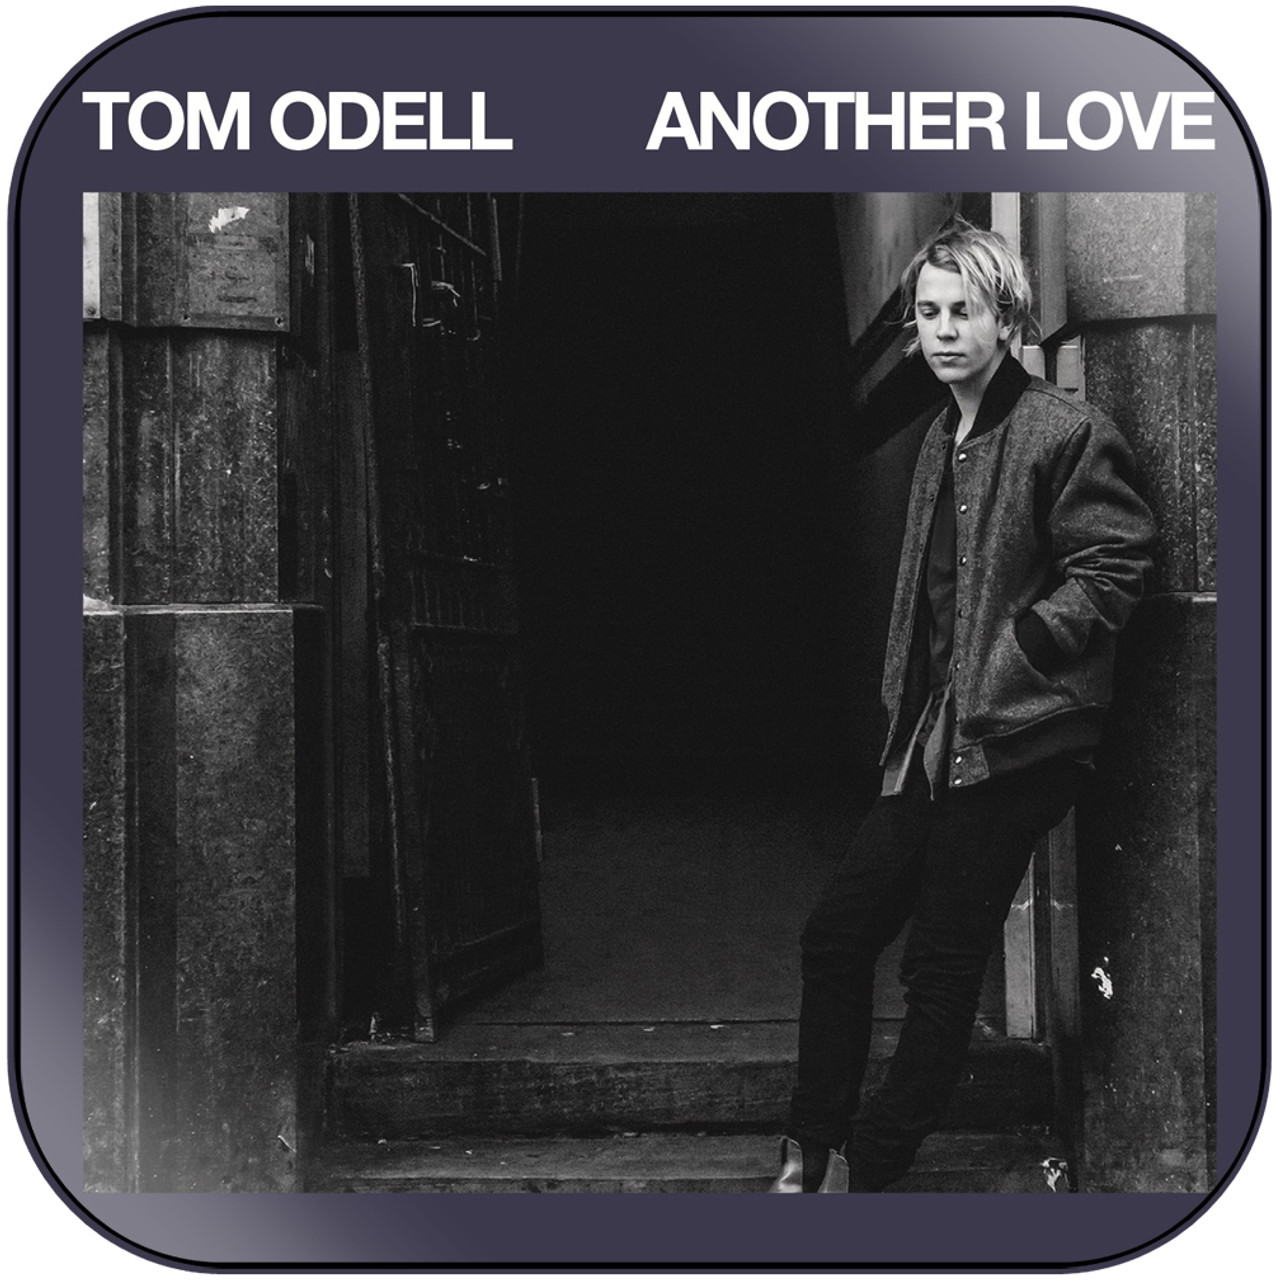 Never love another. Tom Odell обложка. Another Love том Оделл. Tom Odell Love. Tom Odell обложка альбома.